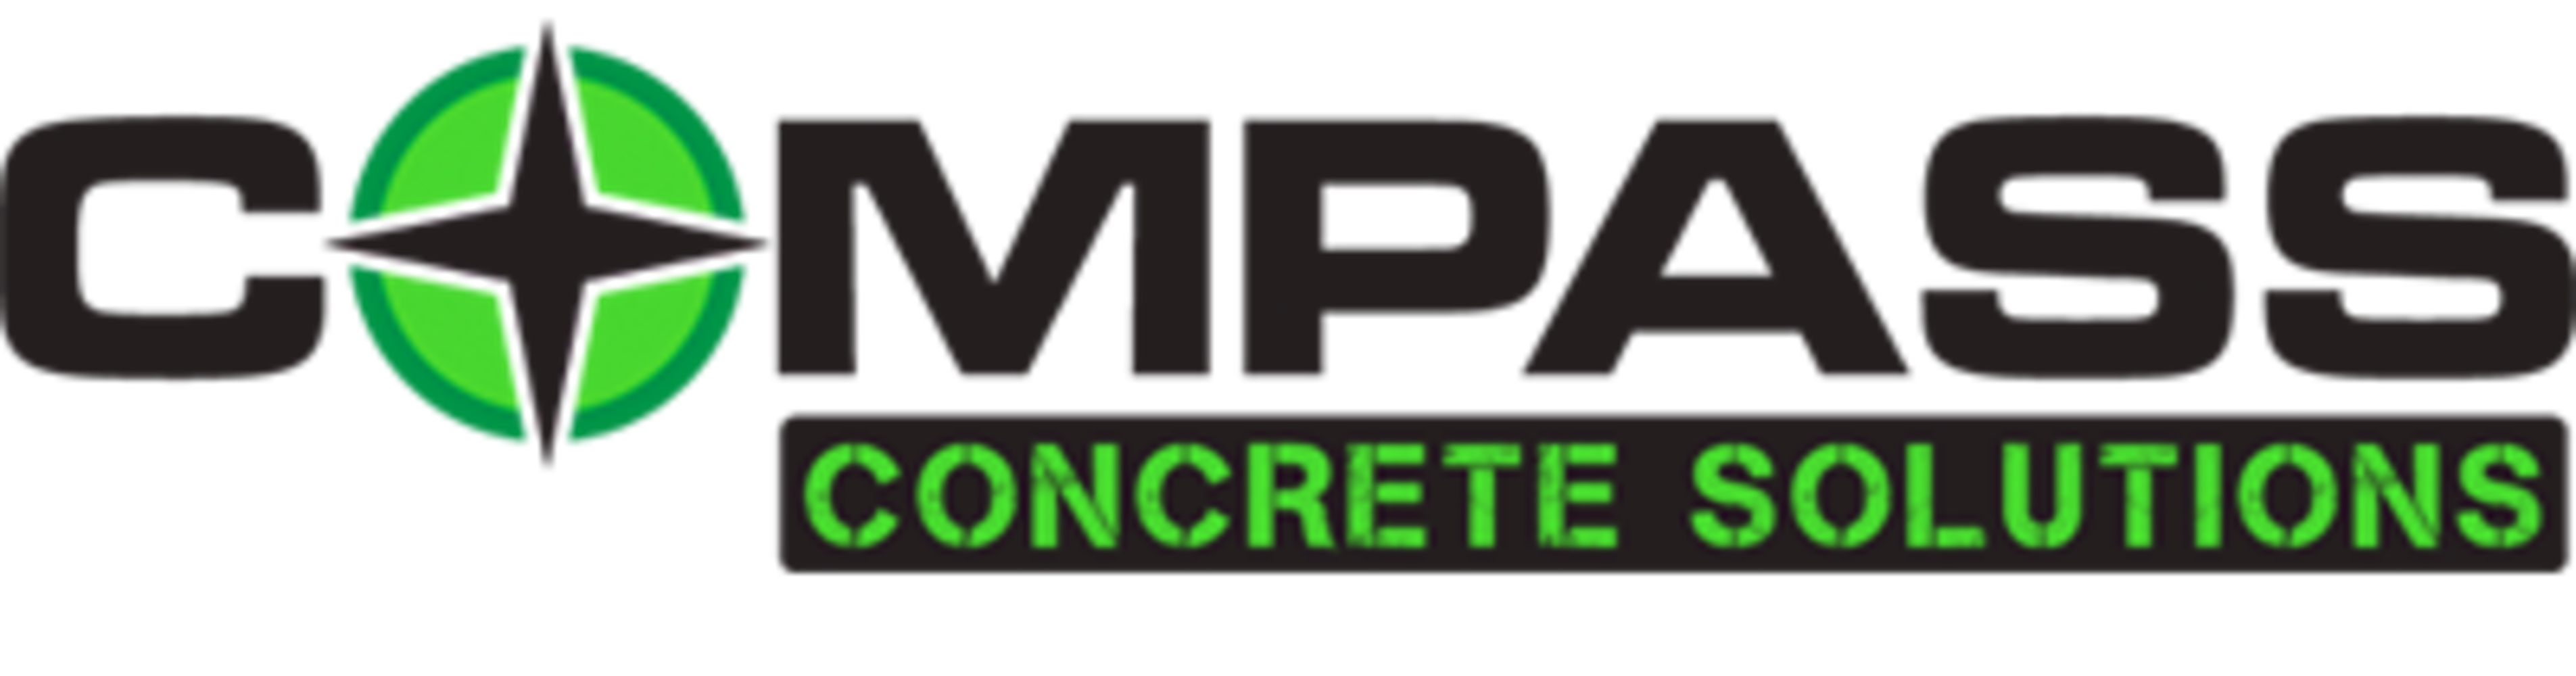 Unreserved Retirement Timed Online Auction of Compass Concrete Solutions